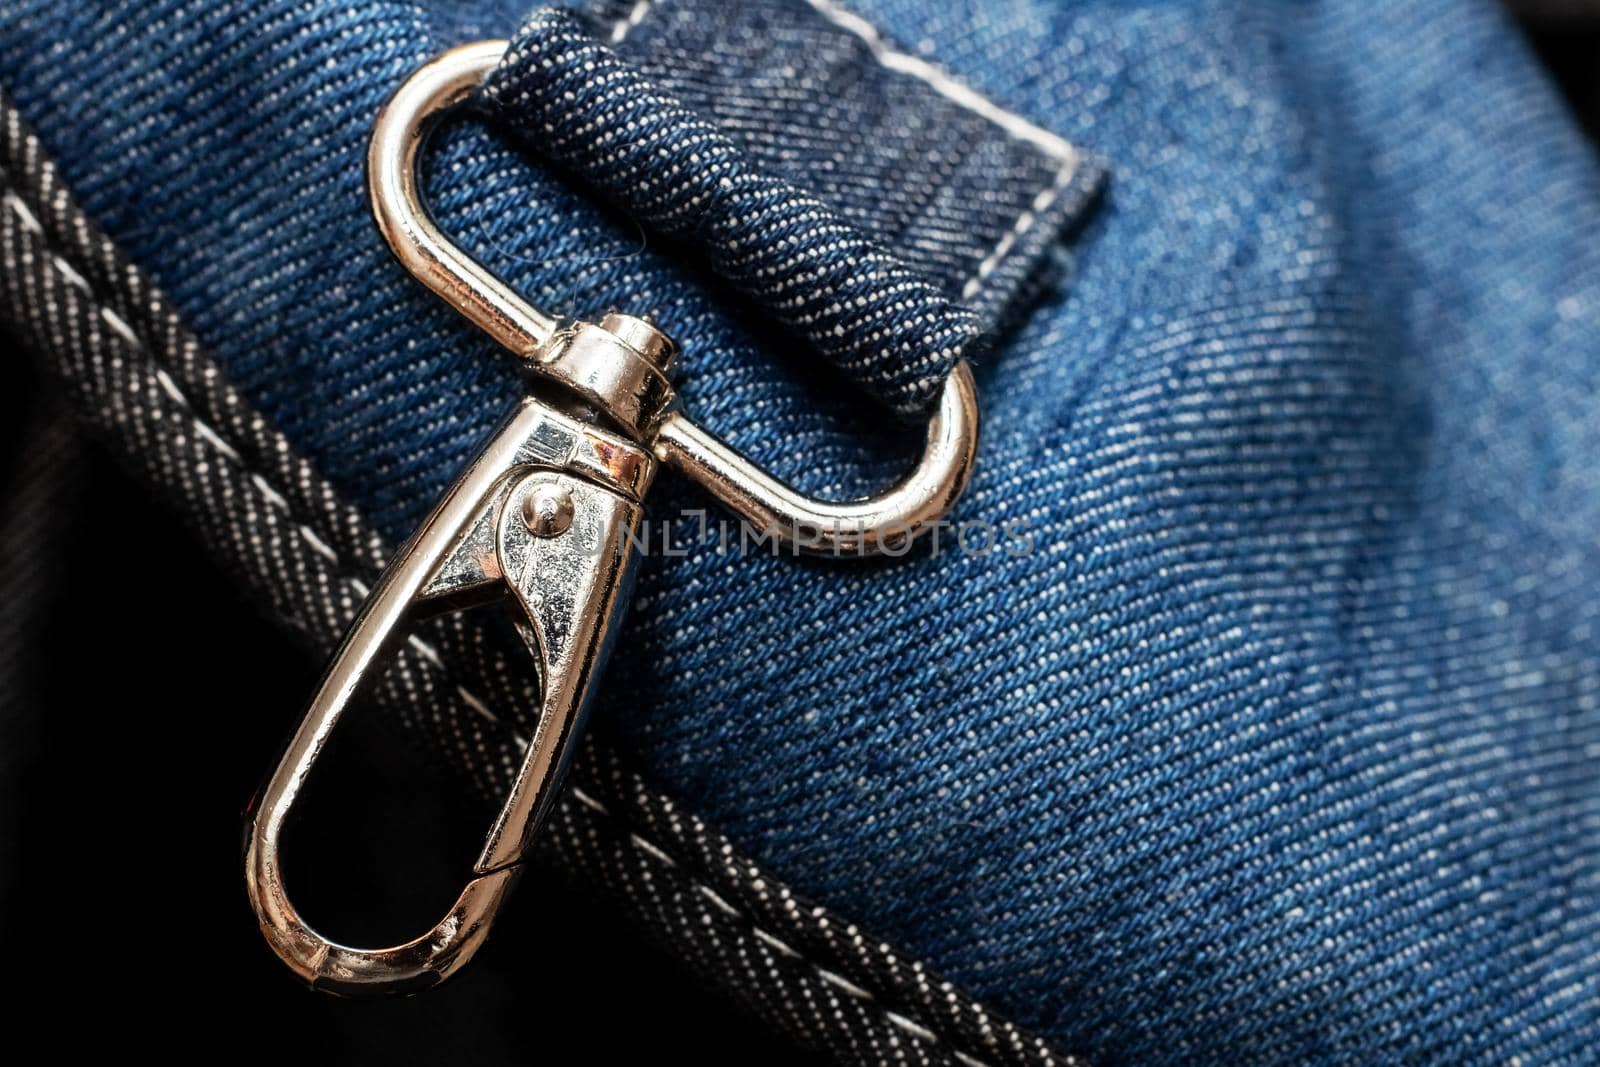 Metal buckle on a blue denim backpack close up by Vera1703